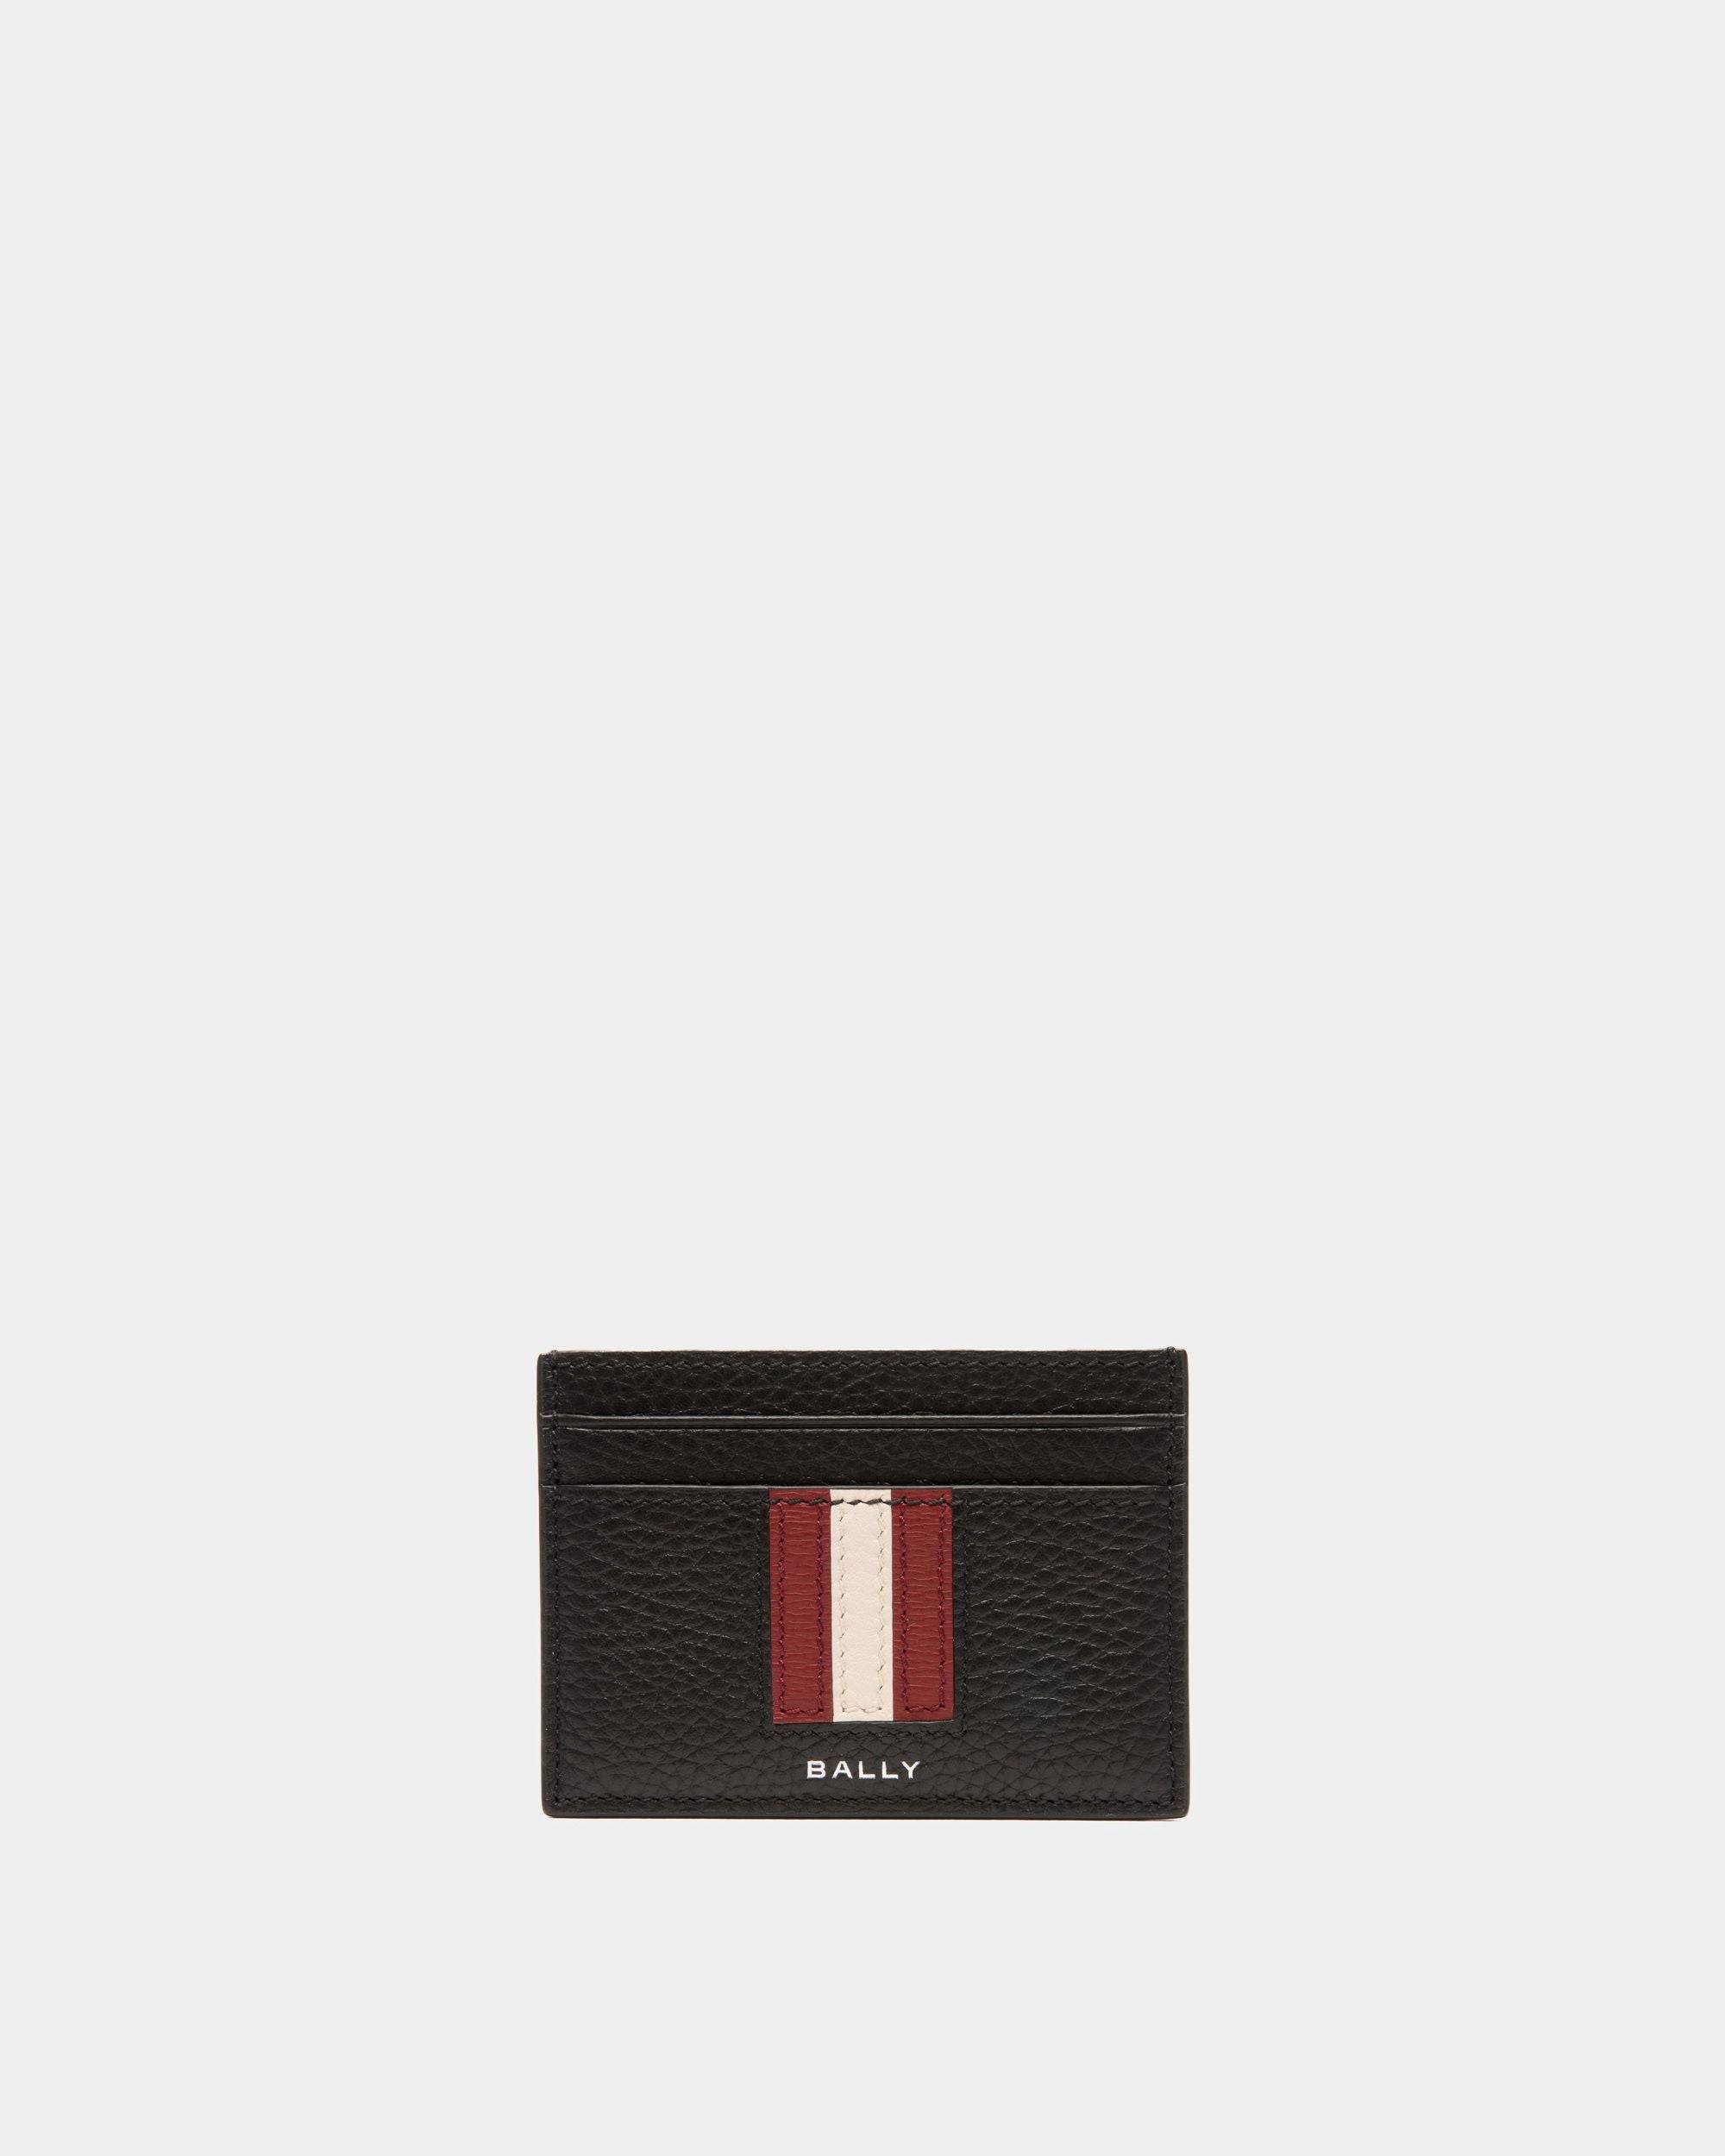 Men's Ribbon Card Holder In Black Grained Leather | Bally | Still Life Front